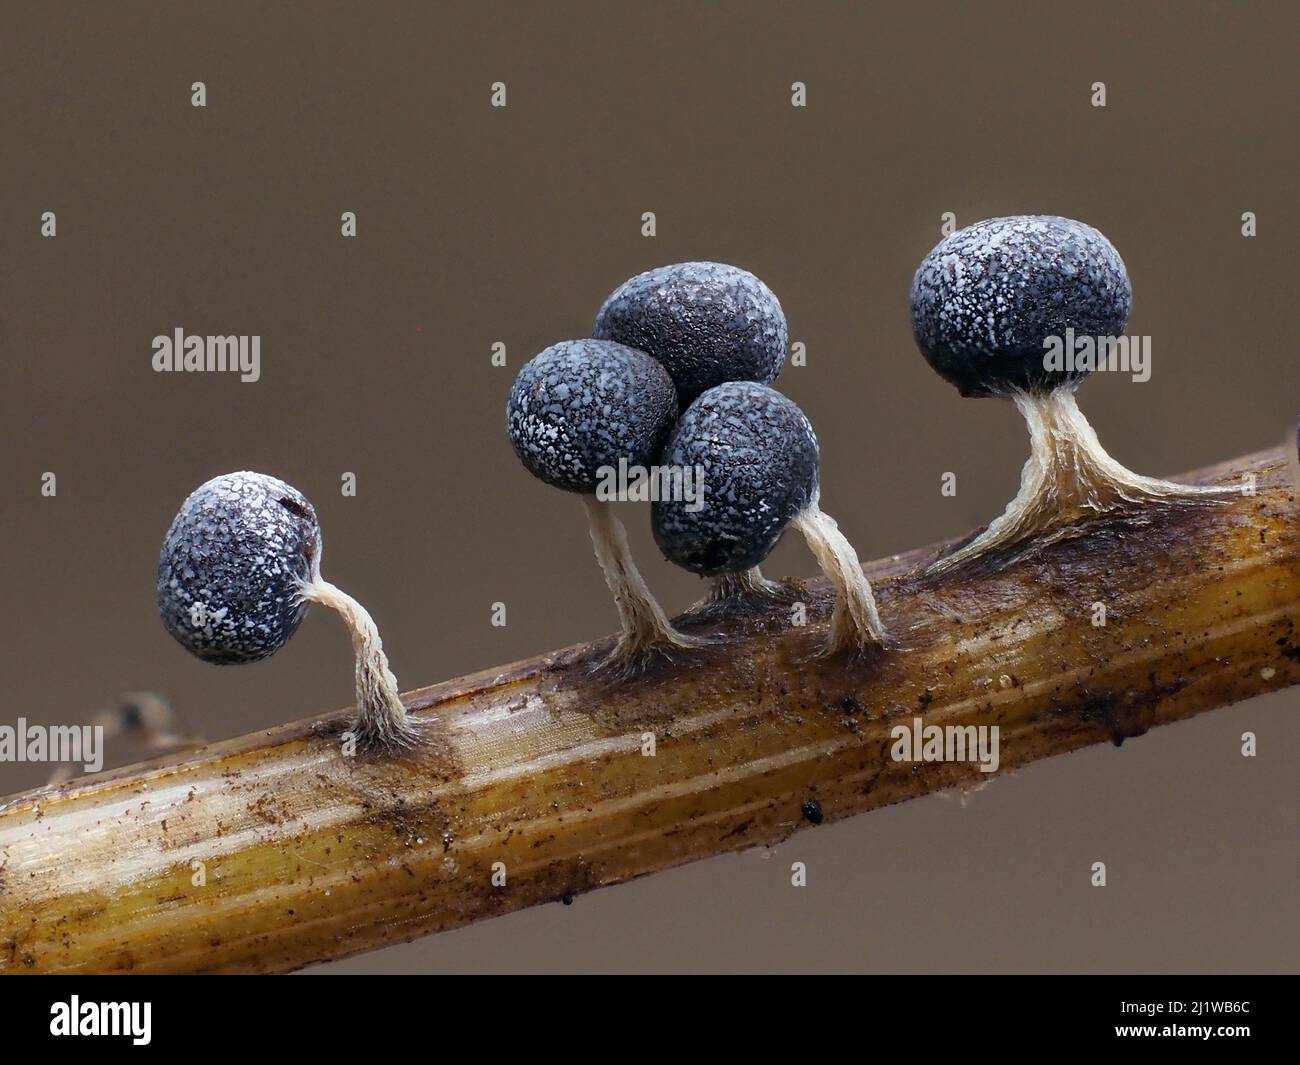 Slime mould (Physarum leucophaeum), in mature reproductive phase, growing on grass. Close-up of spore-bearing fruiting bodies (sporangia). Buckinghams Stock Photo